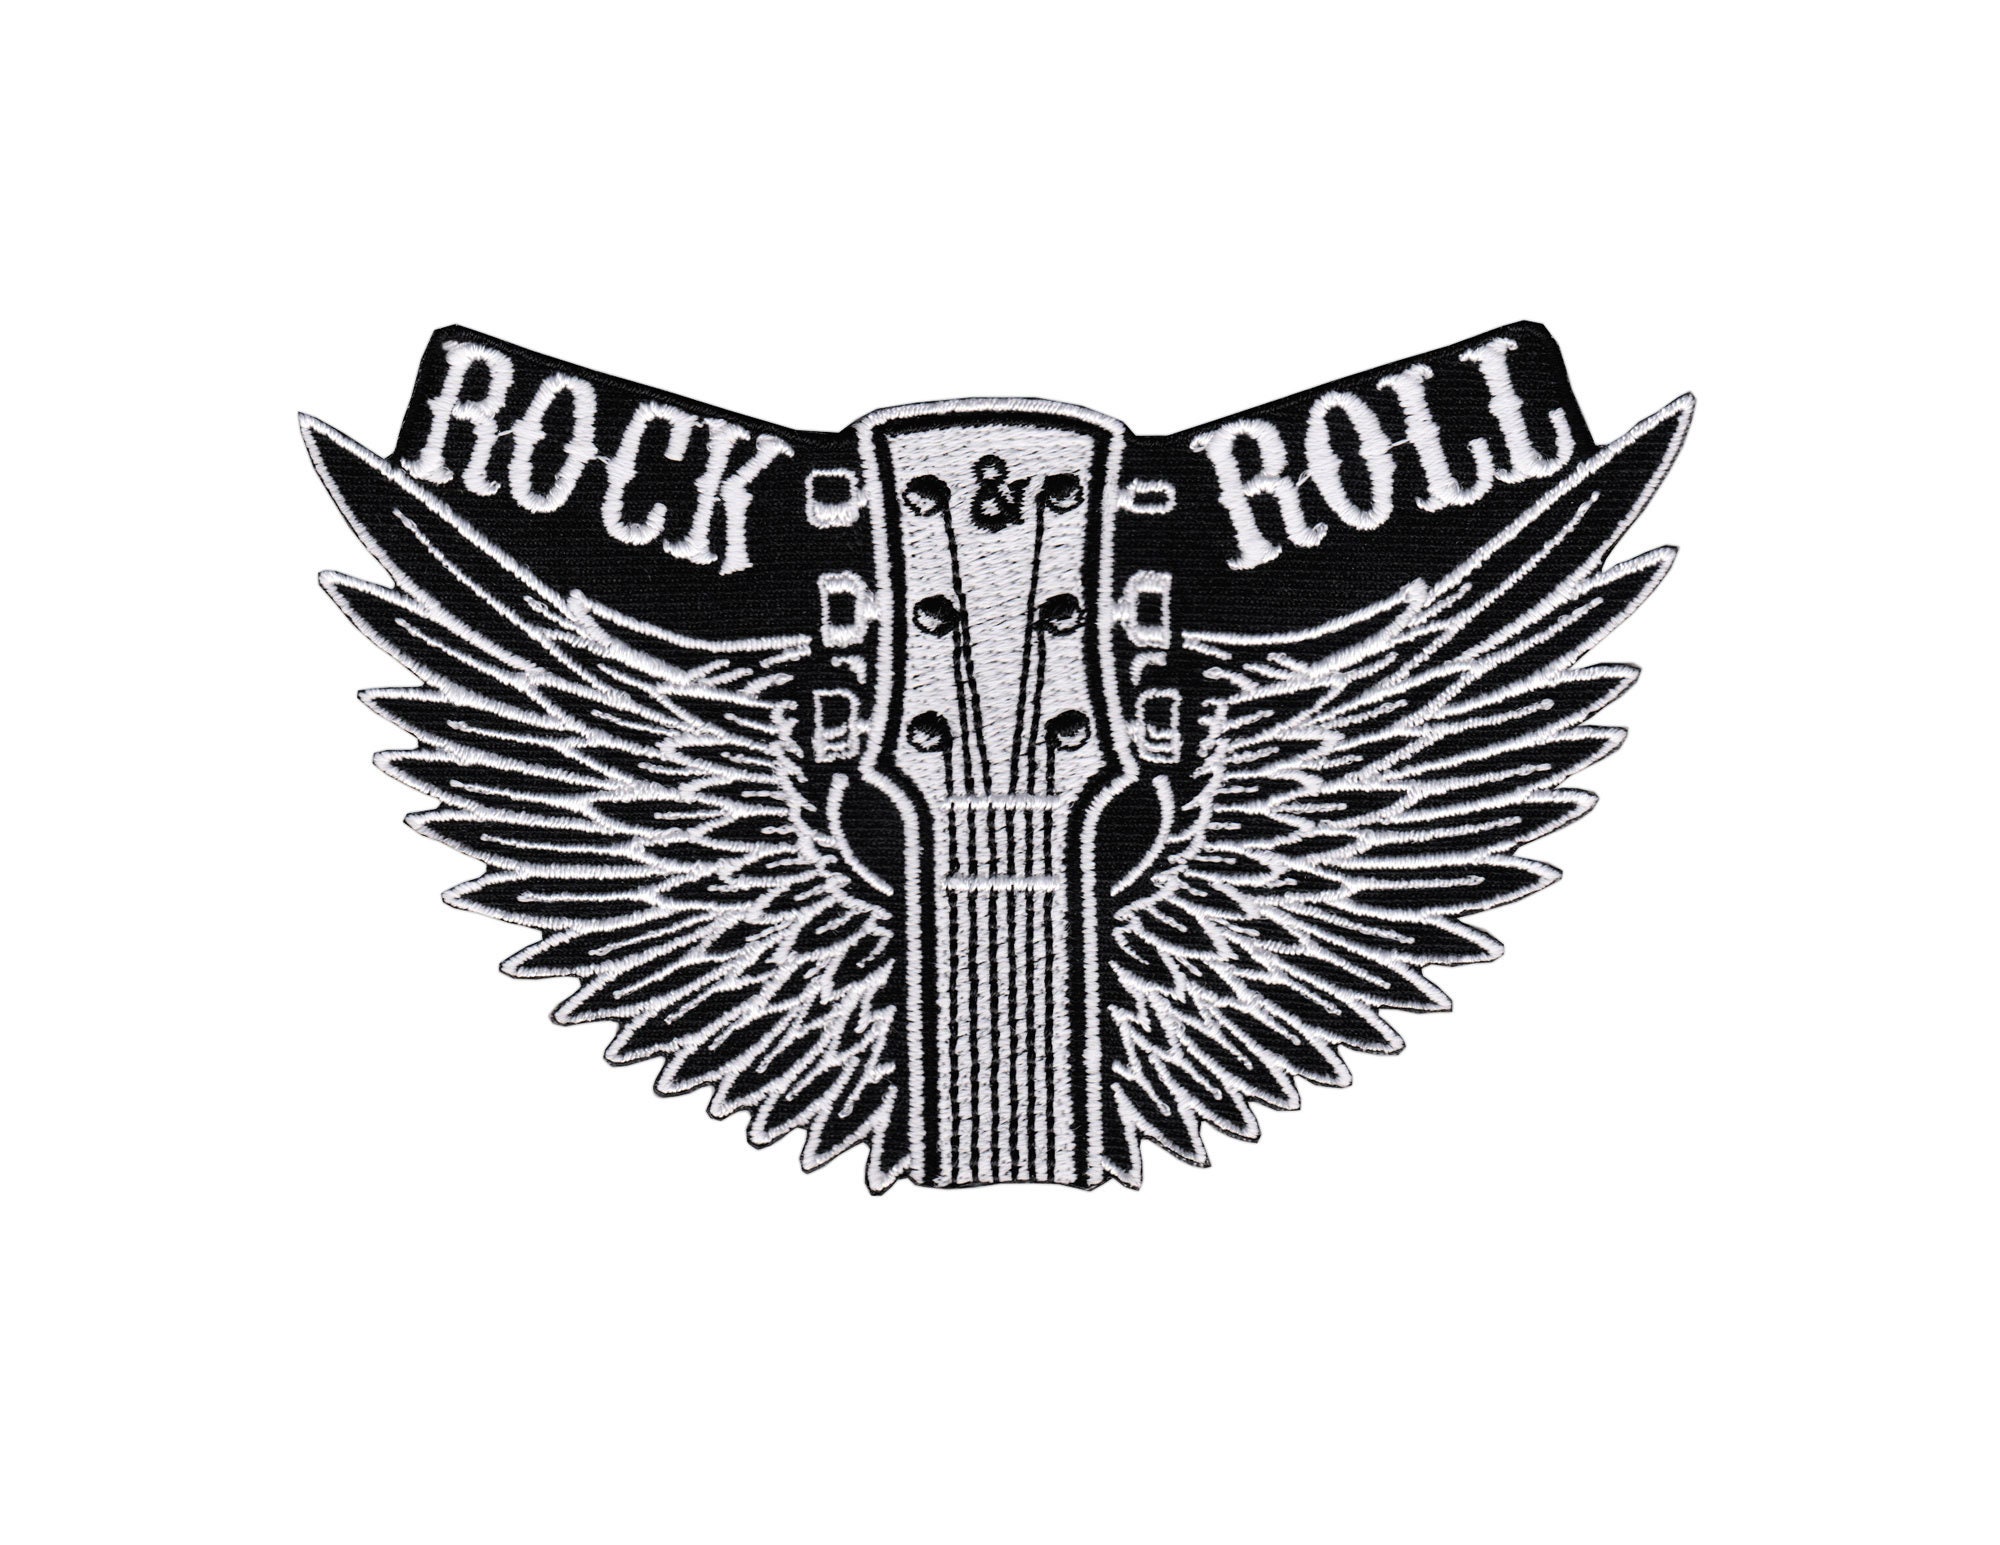 ab73 Rock N Roll Guitar Music Grand Piano Patch IronIng Image Applique Patch Patch Size 12.2 x 7.6 cm